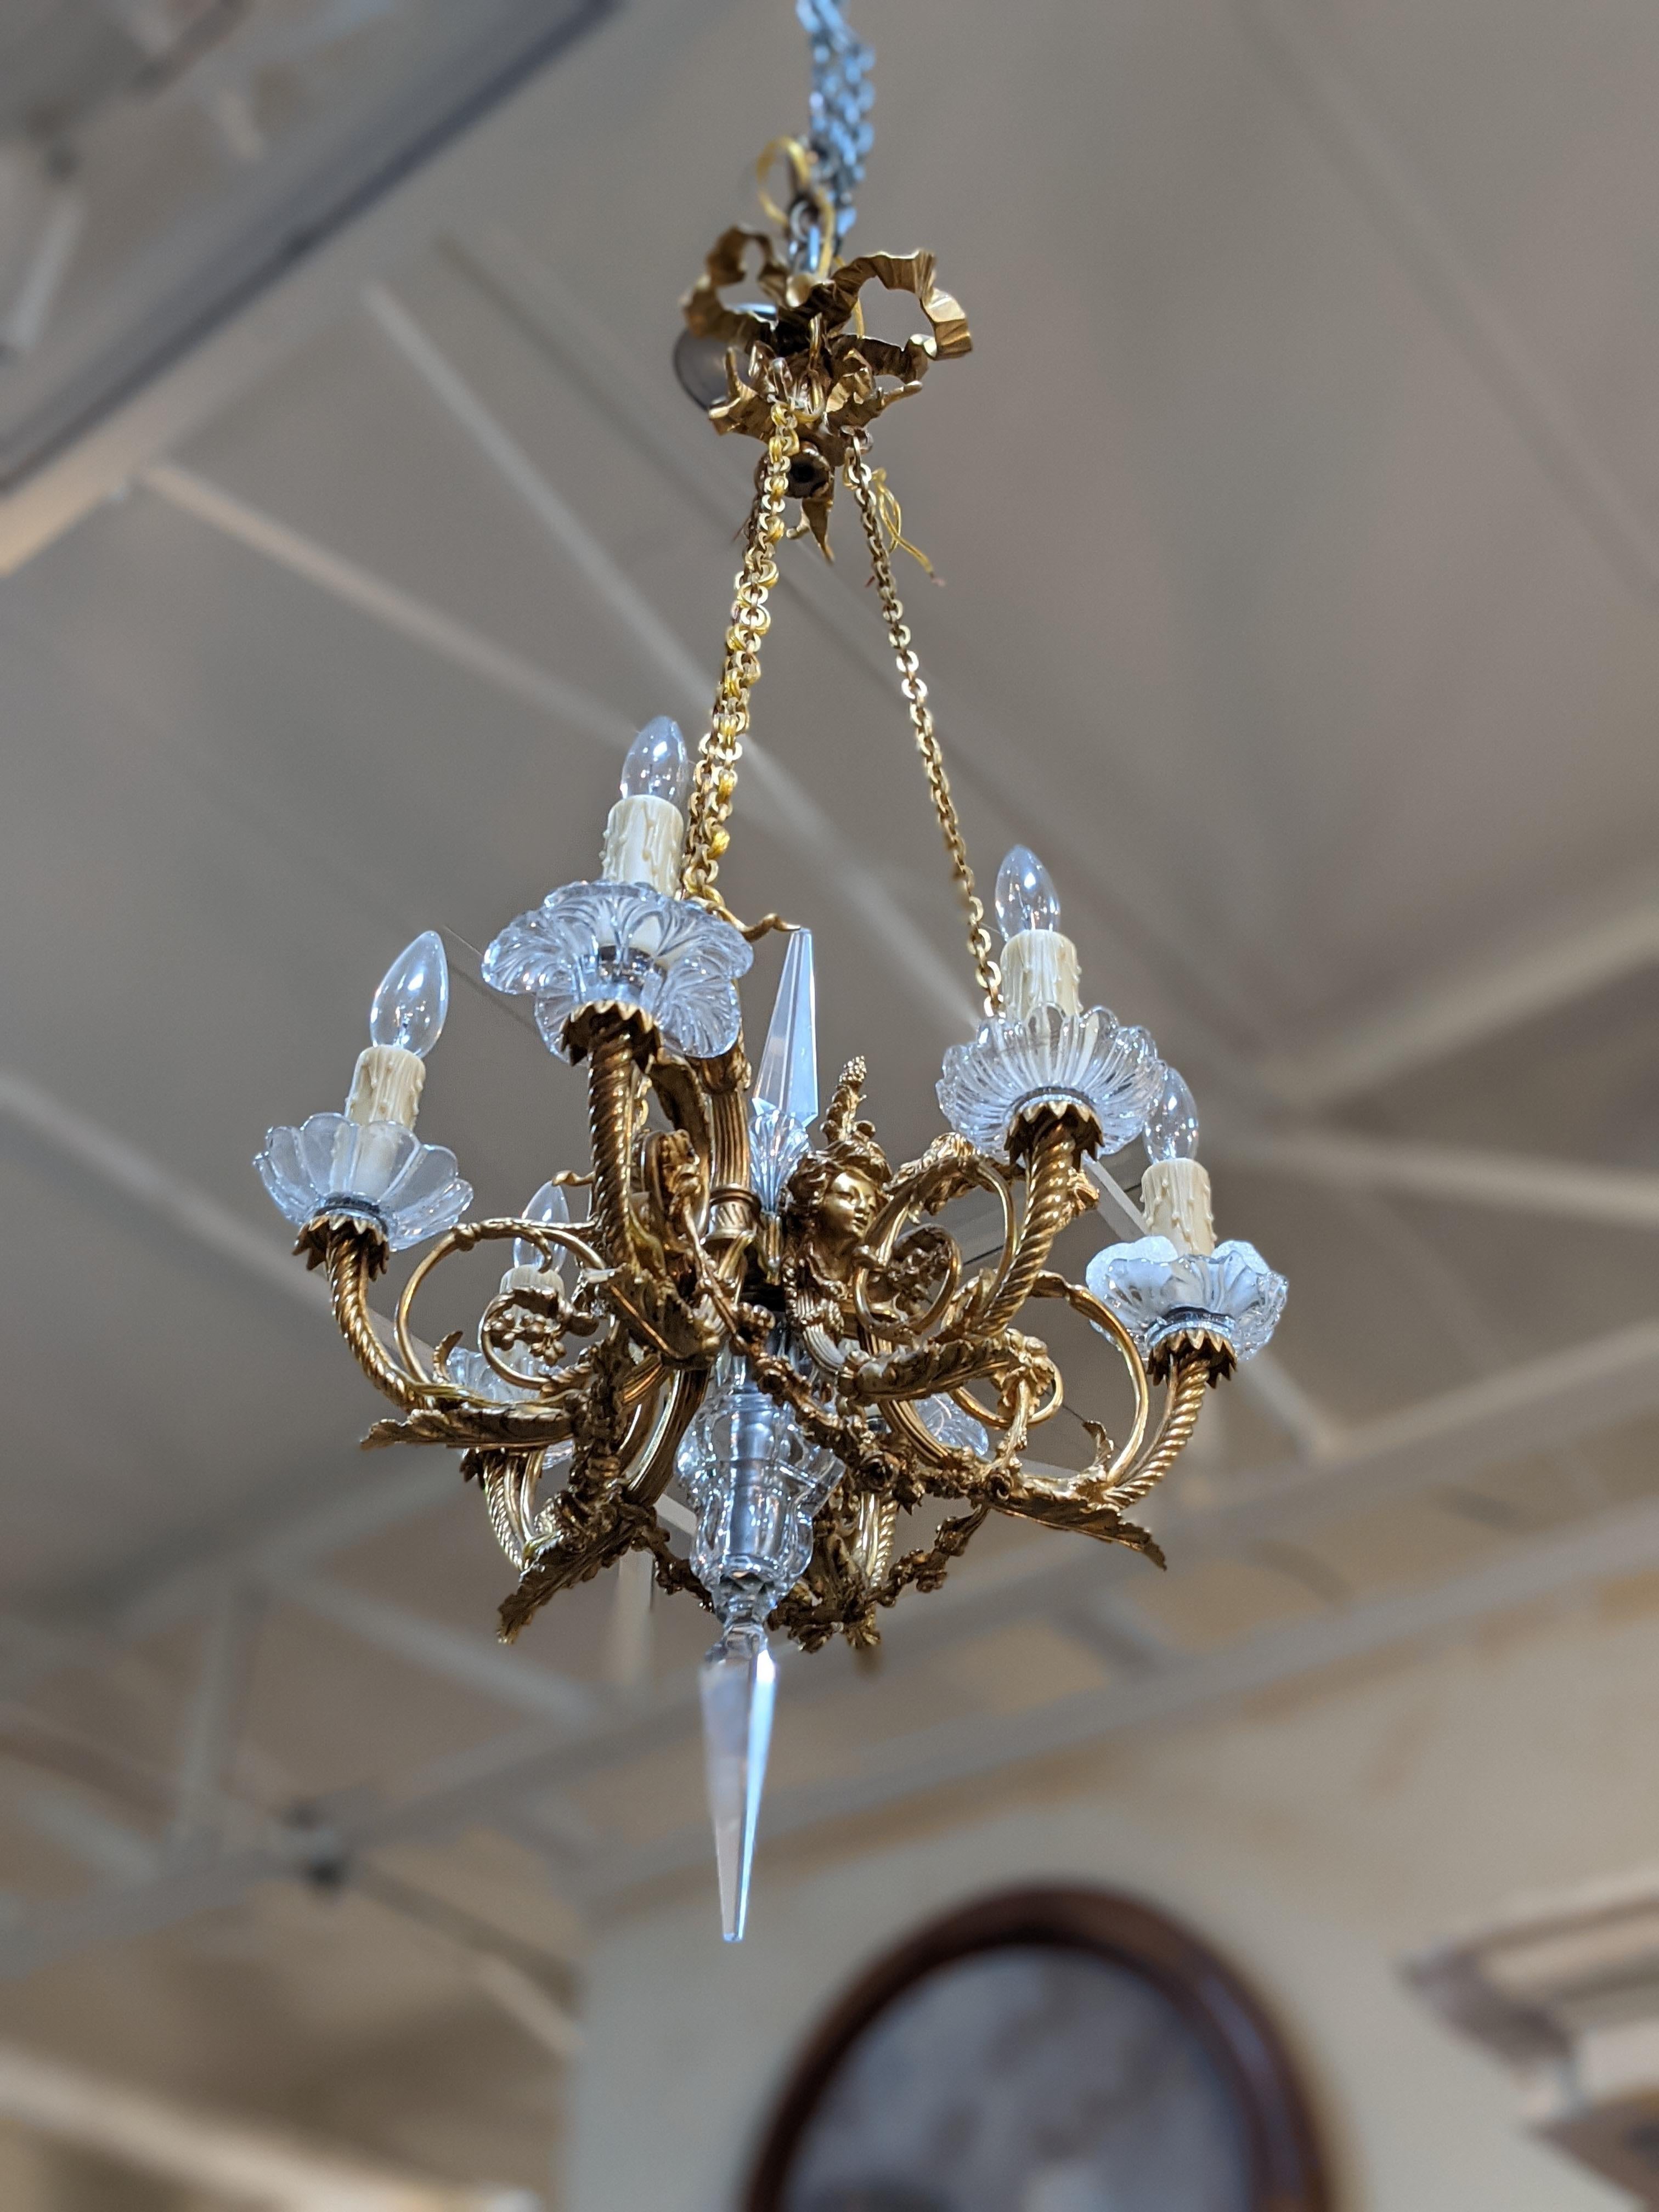 This bronze and crystal chandelier origins from France.

6 lights,

19th century period.